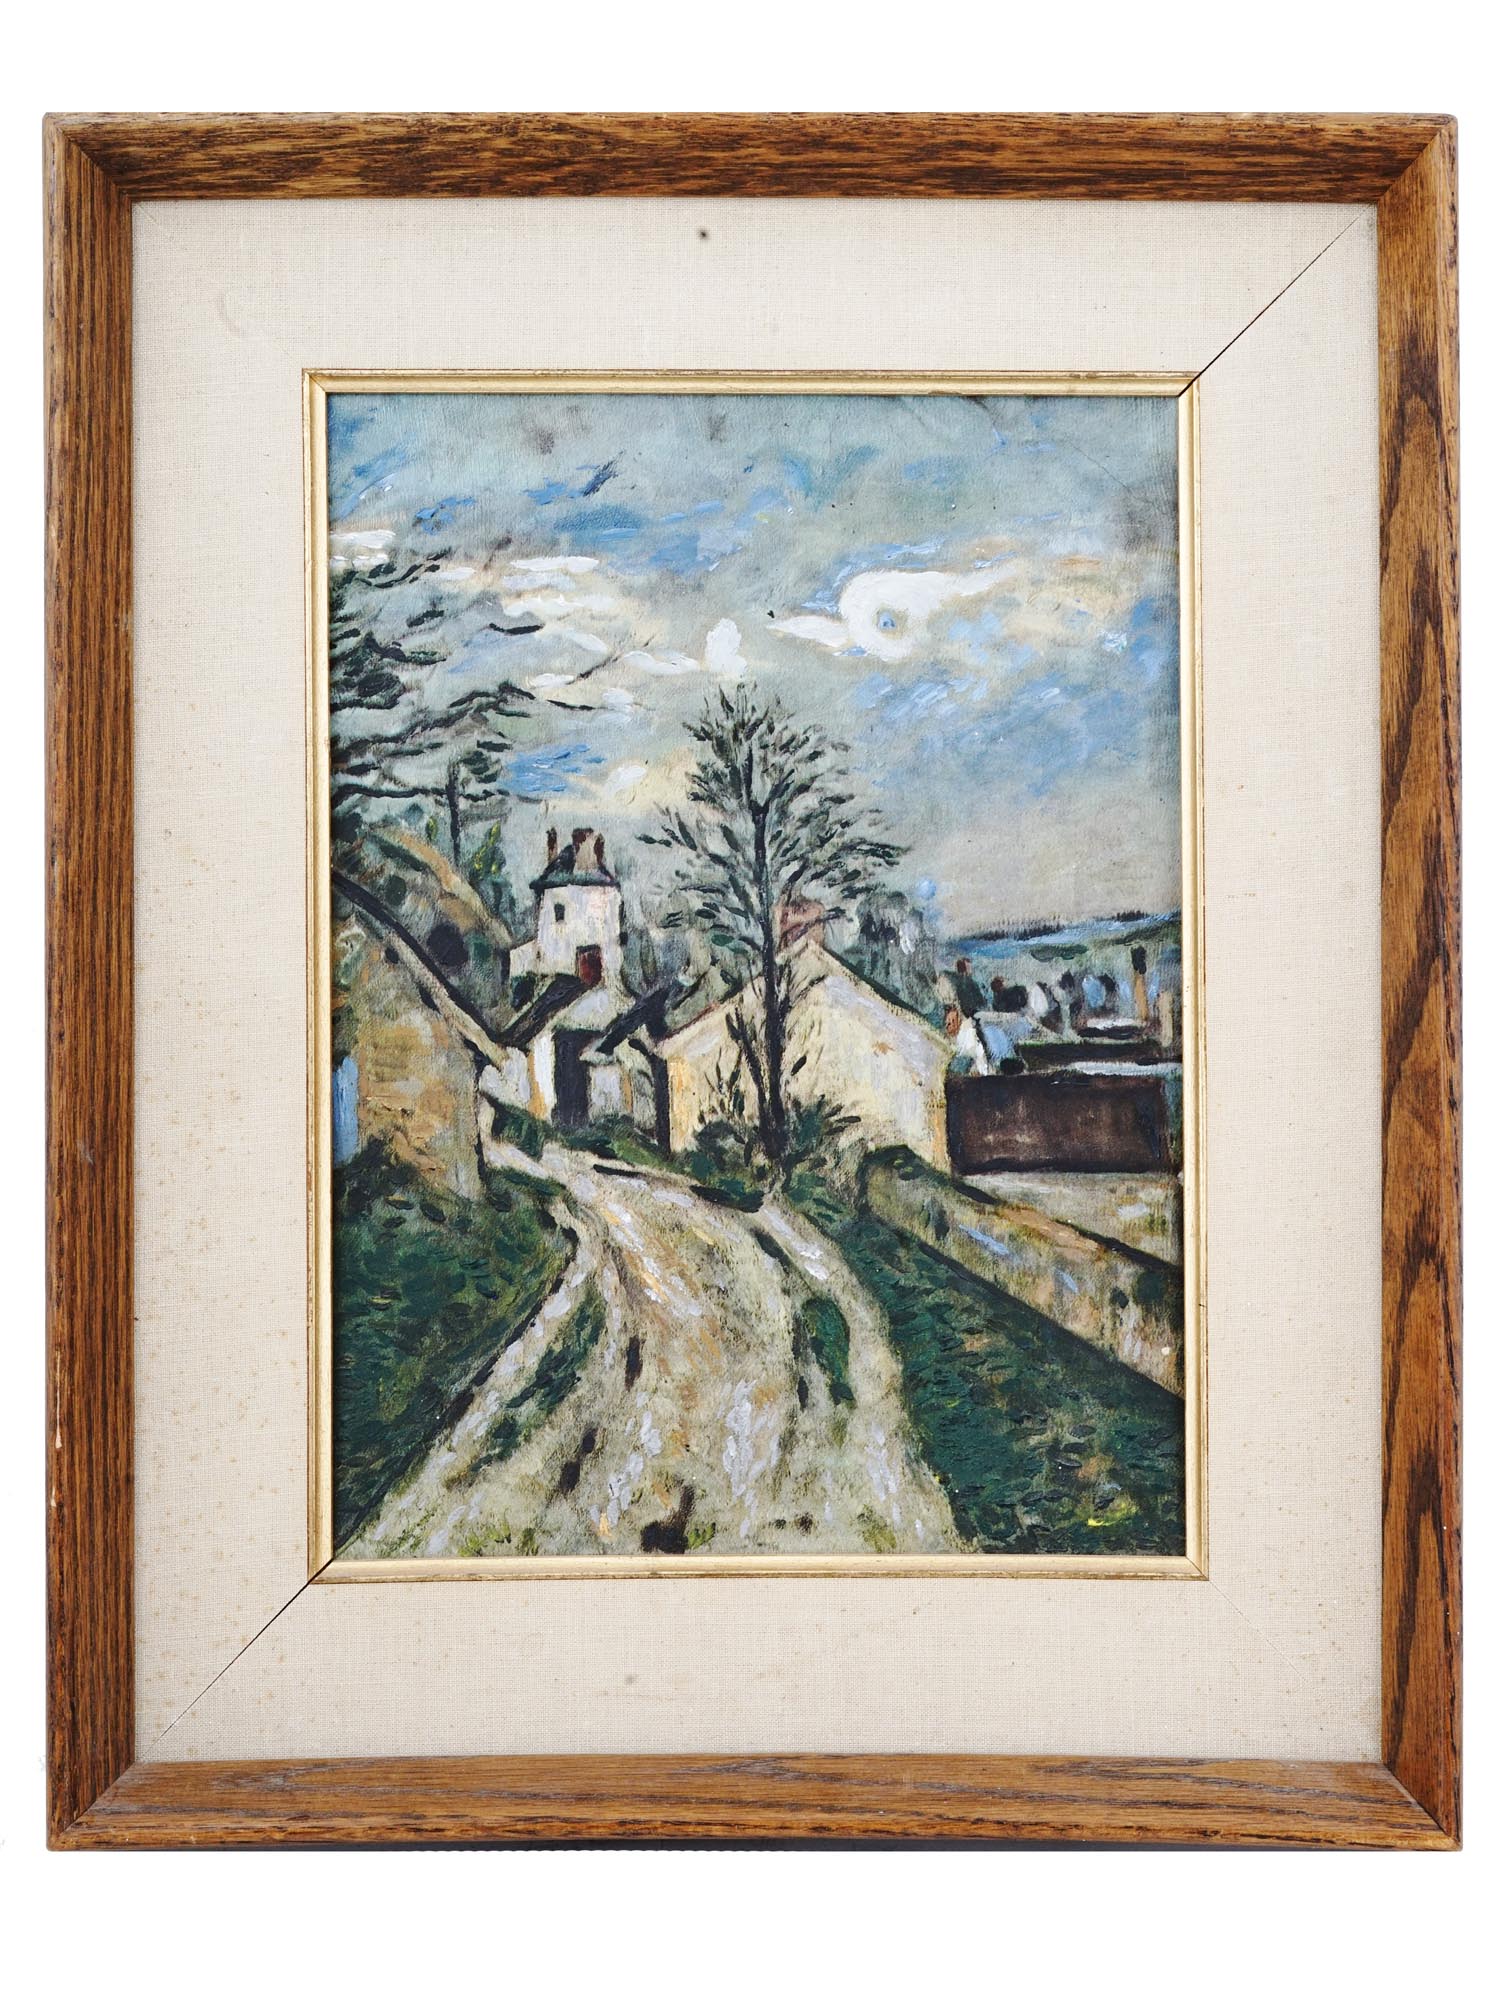 HAND COLORED IMPRESSIONIST PRINT AFTER SEZANNE